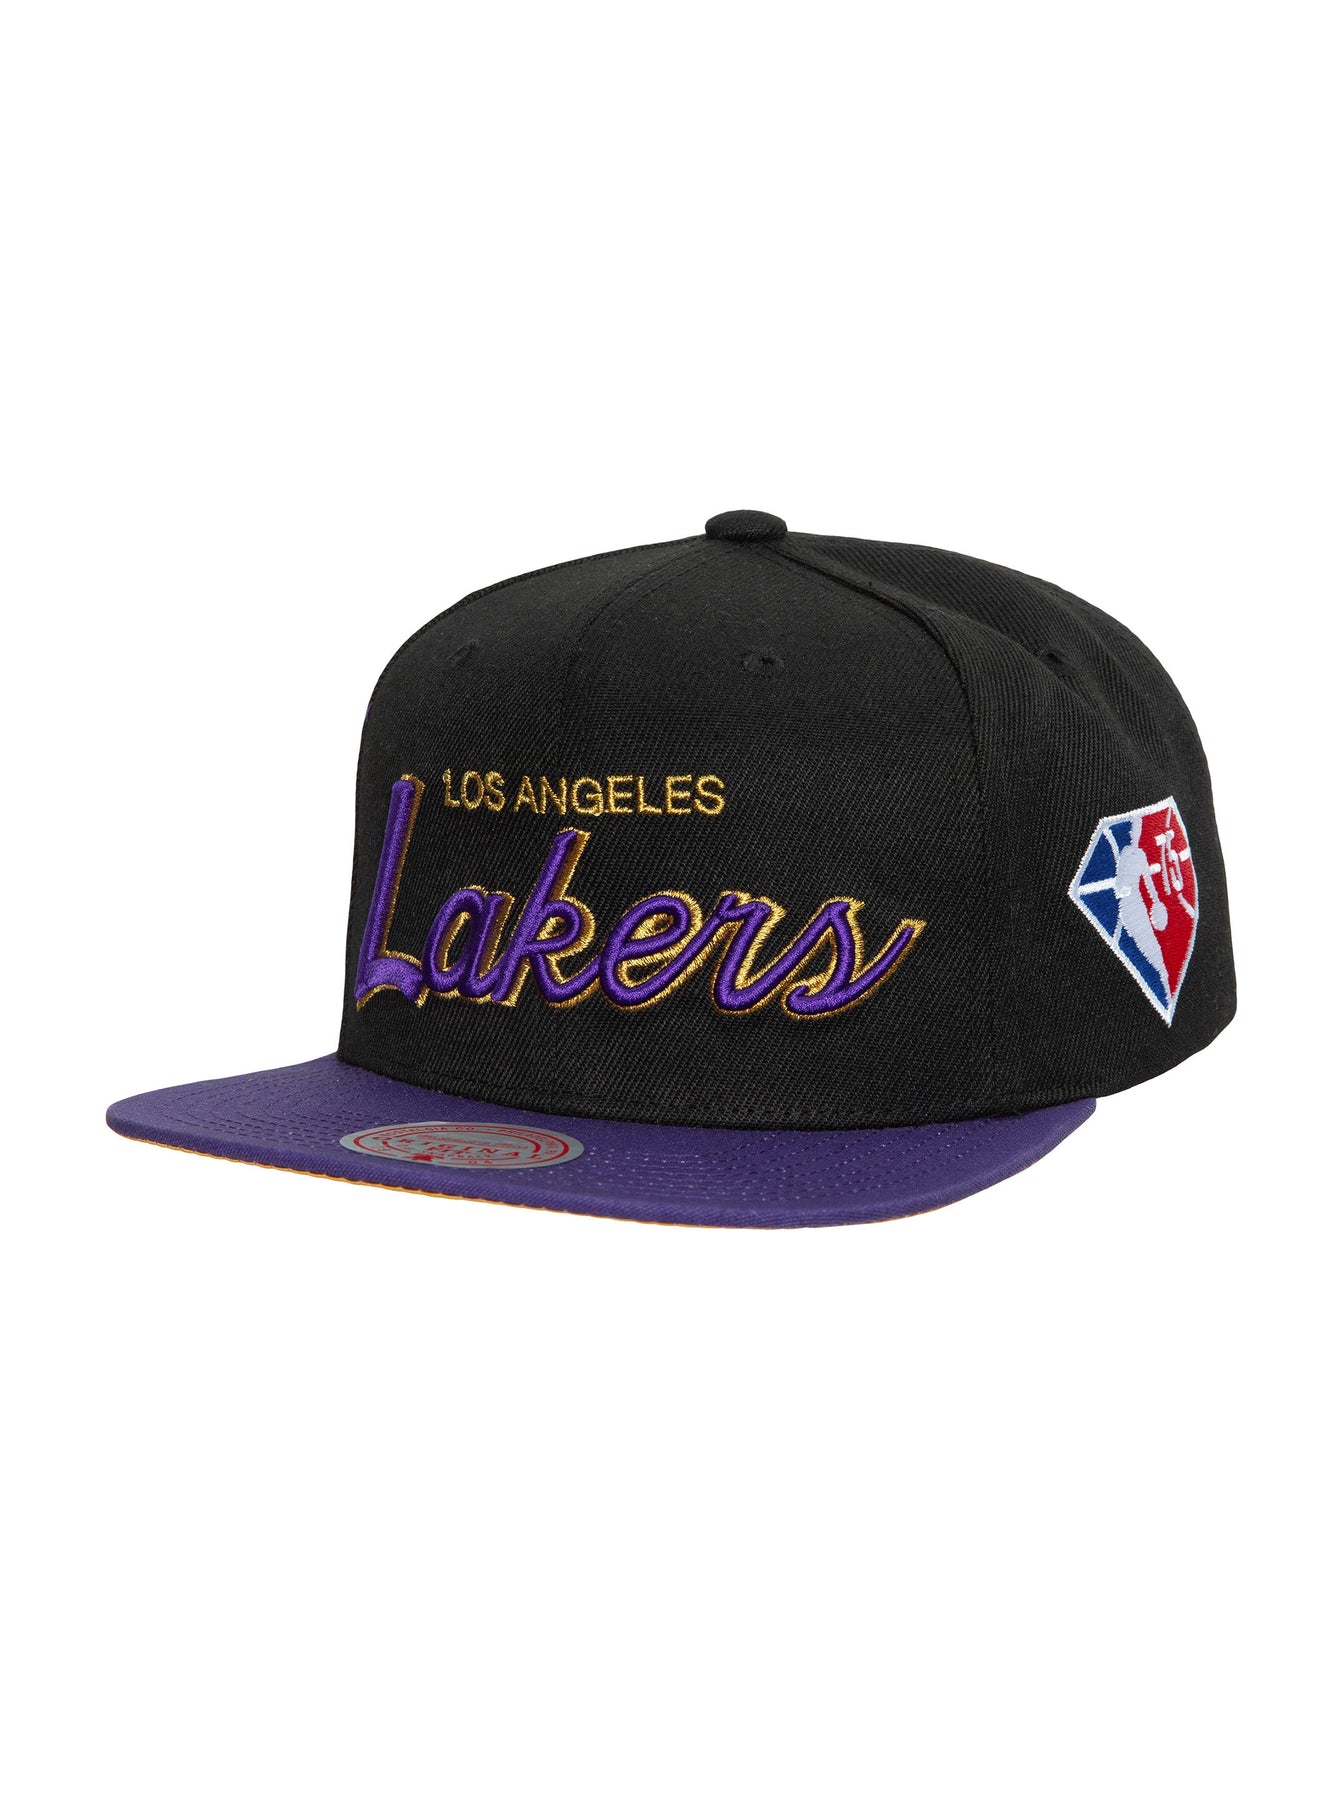 Mitchell & Ness Celebrates NBA Icons with new Heritage